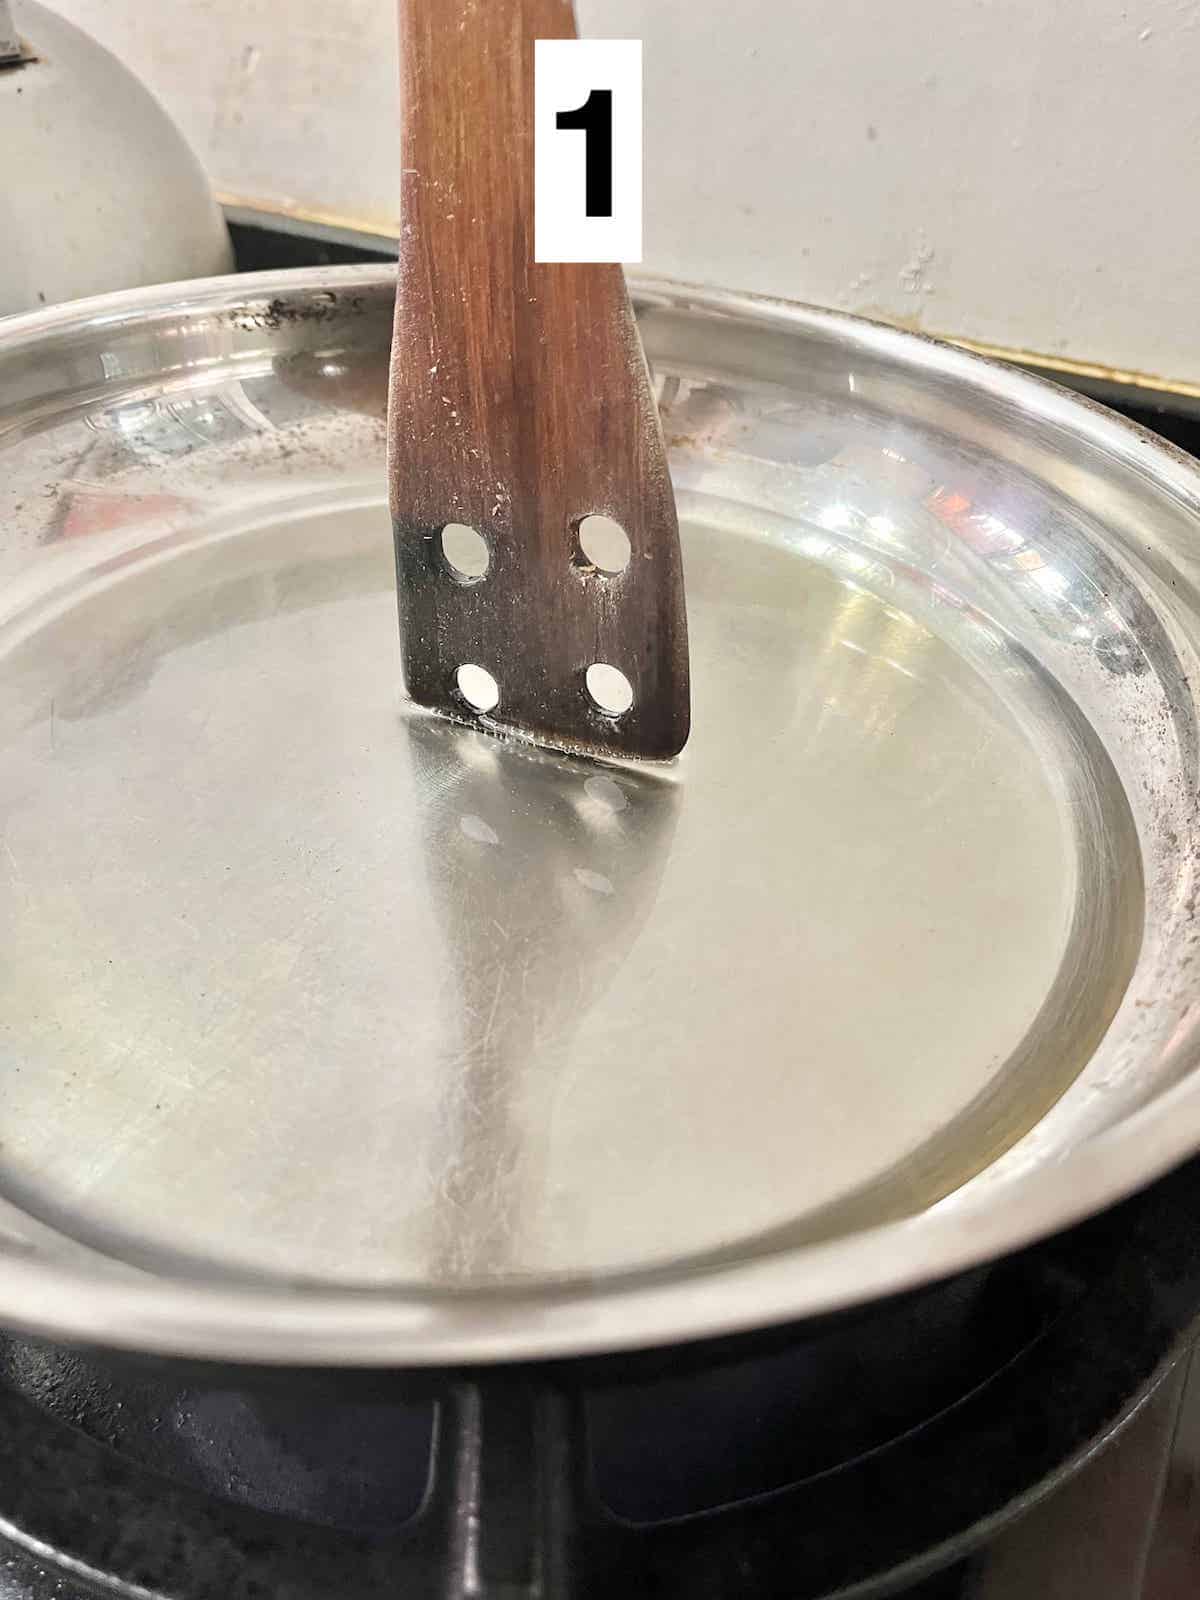 Inserting a wooden spatula into a pan of hot oil.